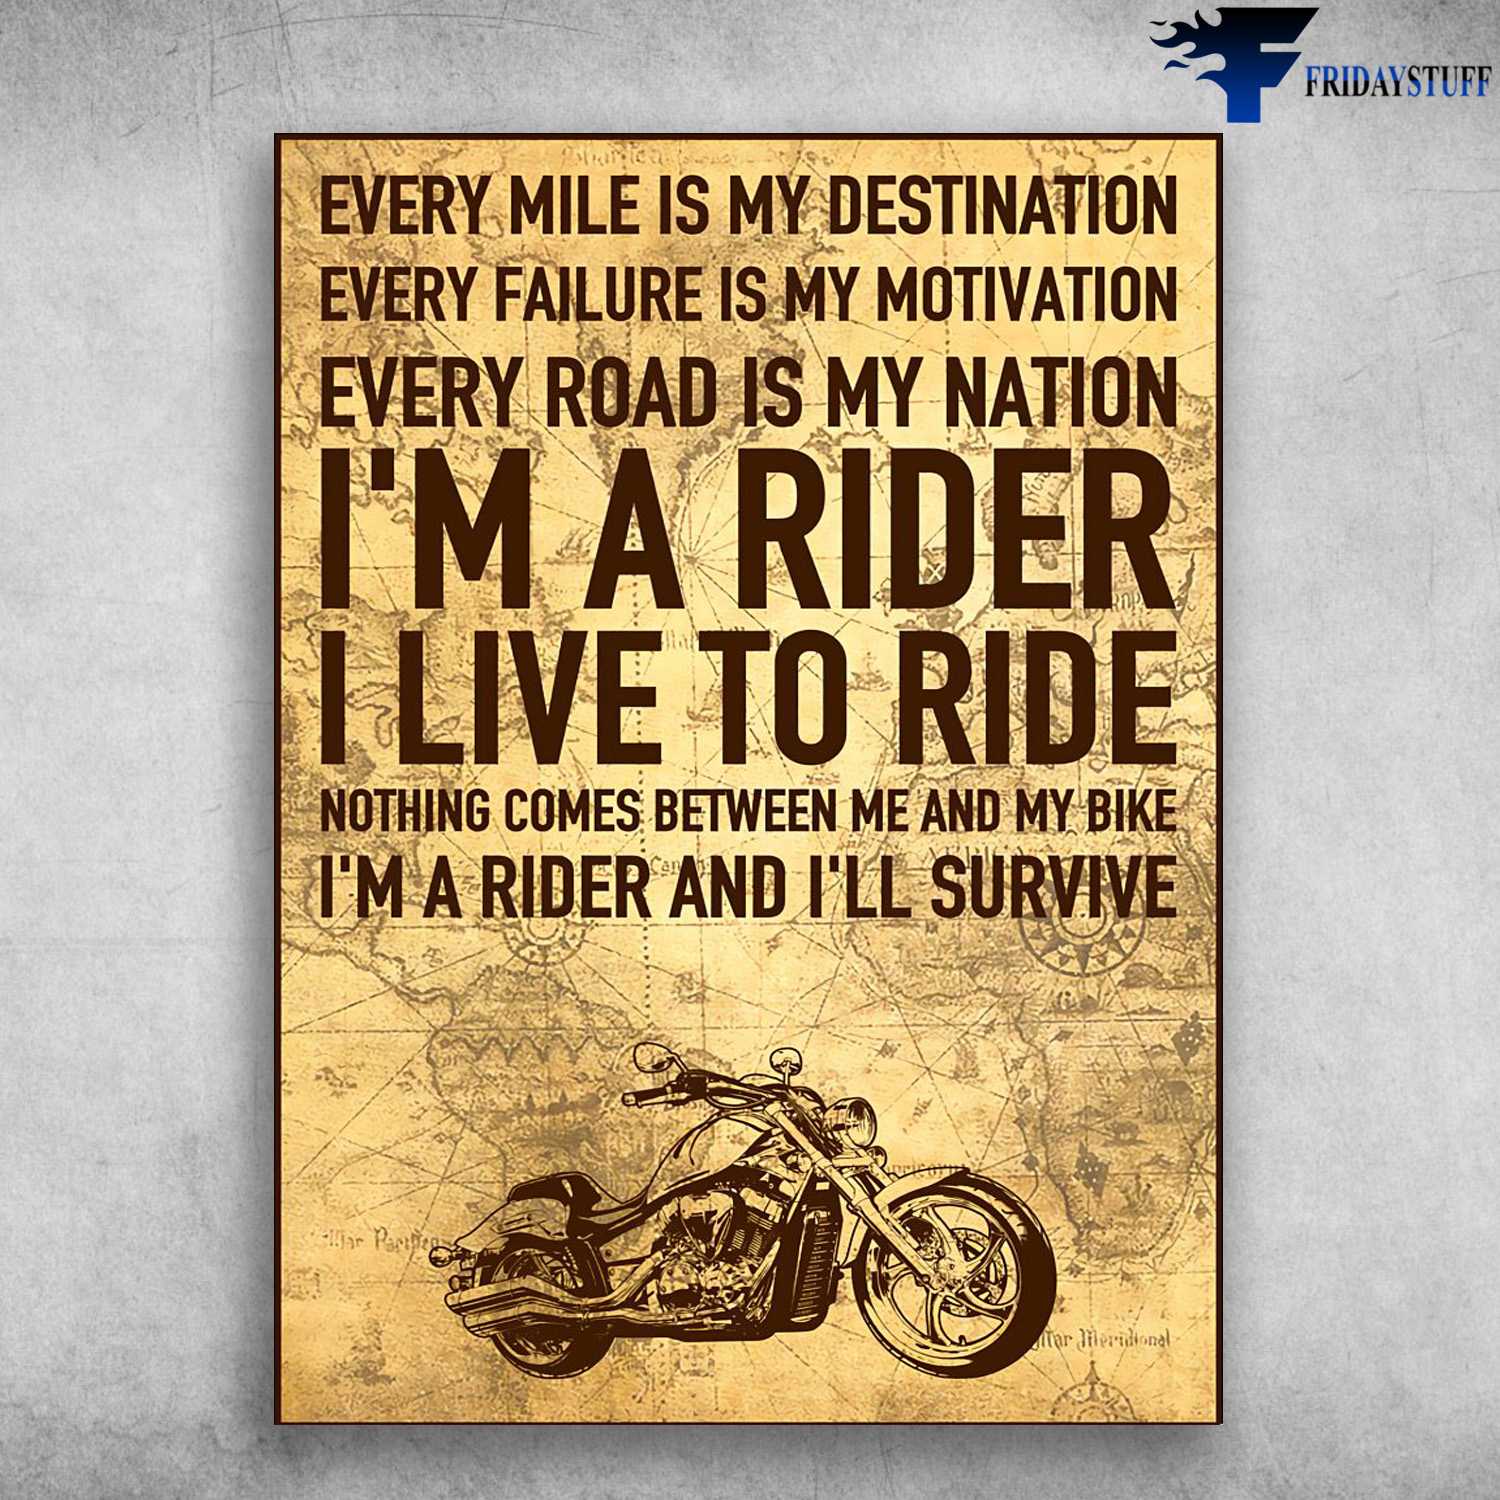 Motorcycle Decor, Biker Lover, Every Mile Is My Destination, Every Failure Is My Motivation, I'm A Rider, I Live To Ride, Nothing Comes Between Me And My Biker, I'm A Rider And I'll Survive